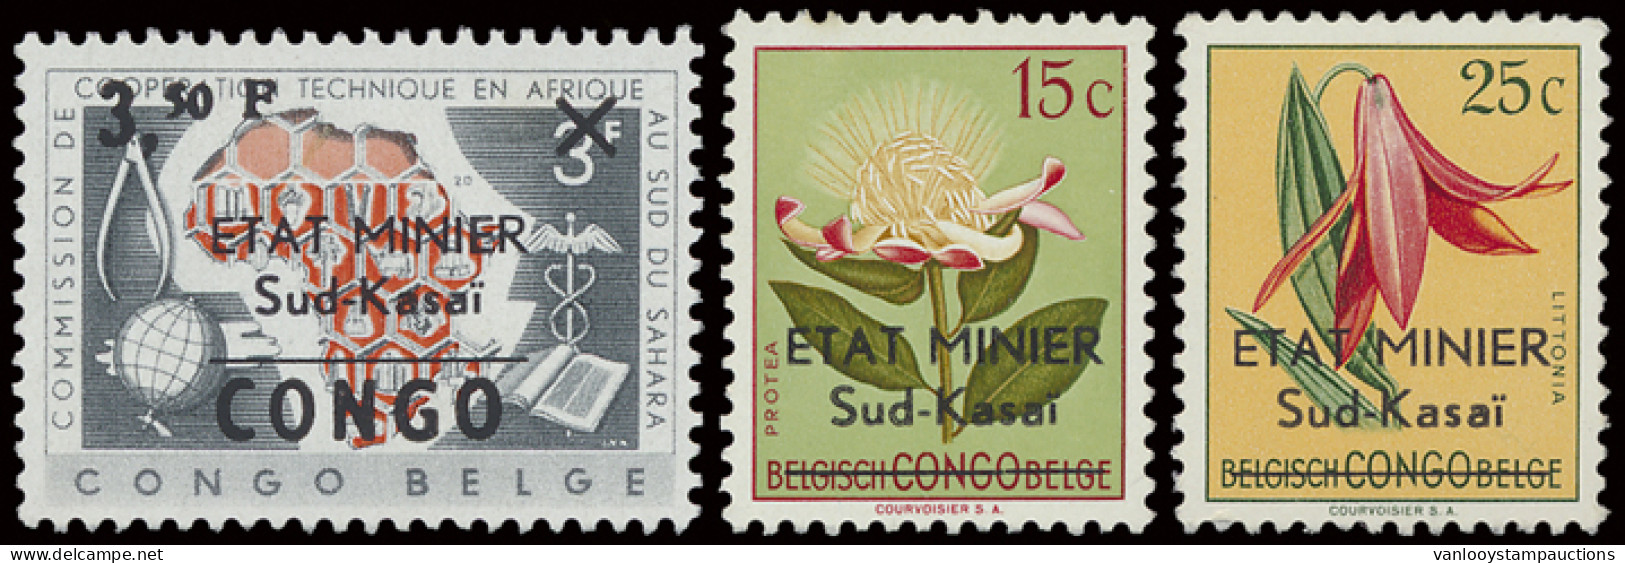 ** Lot Of 3 Stamps With Overprint ÉTAT MINIER SUD-KASAI, MNH, Very Scarce, Unlisted In OBP Catalogue, Only 3 Values Issu - Sud-Kasaï